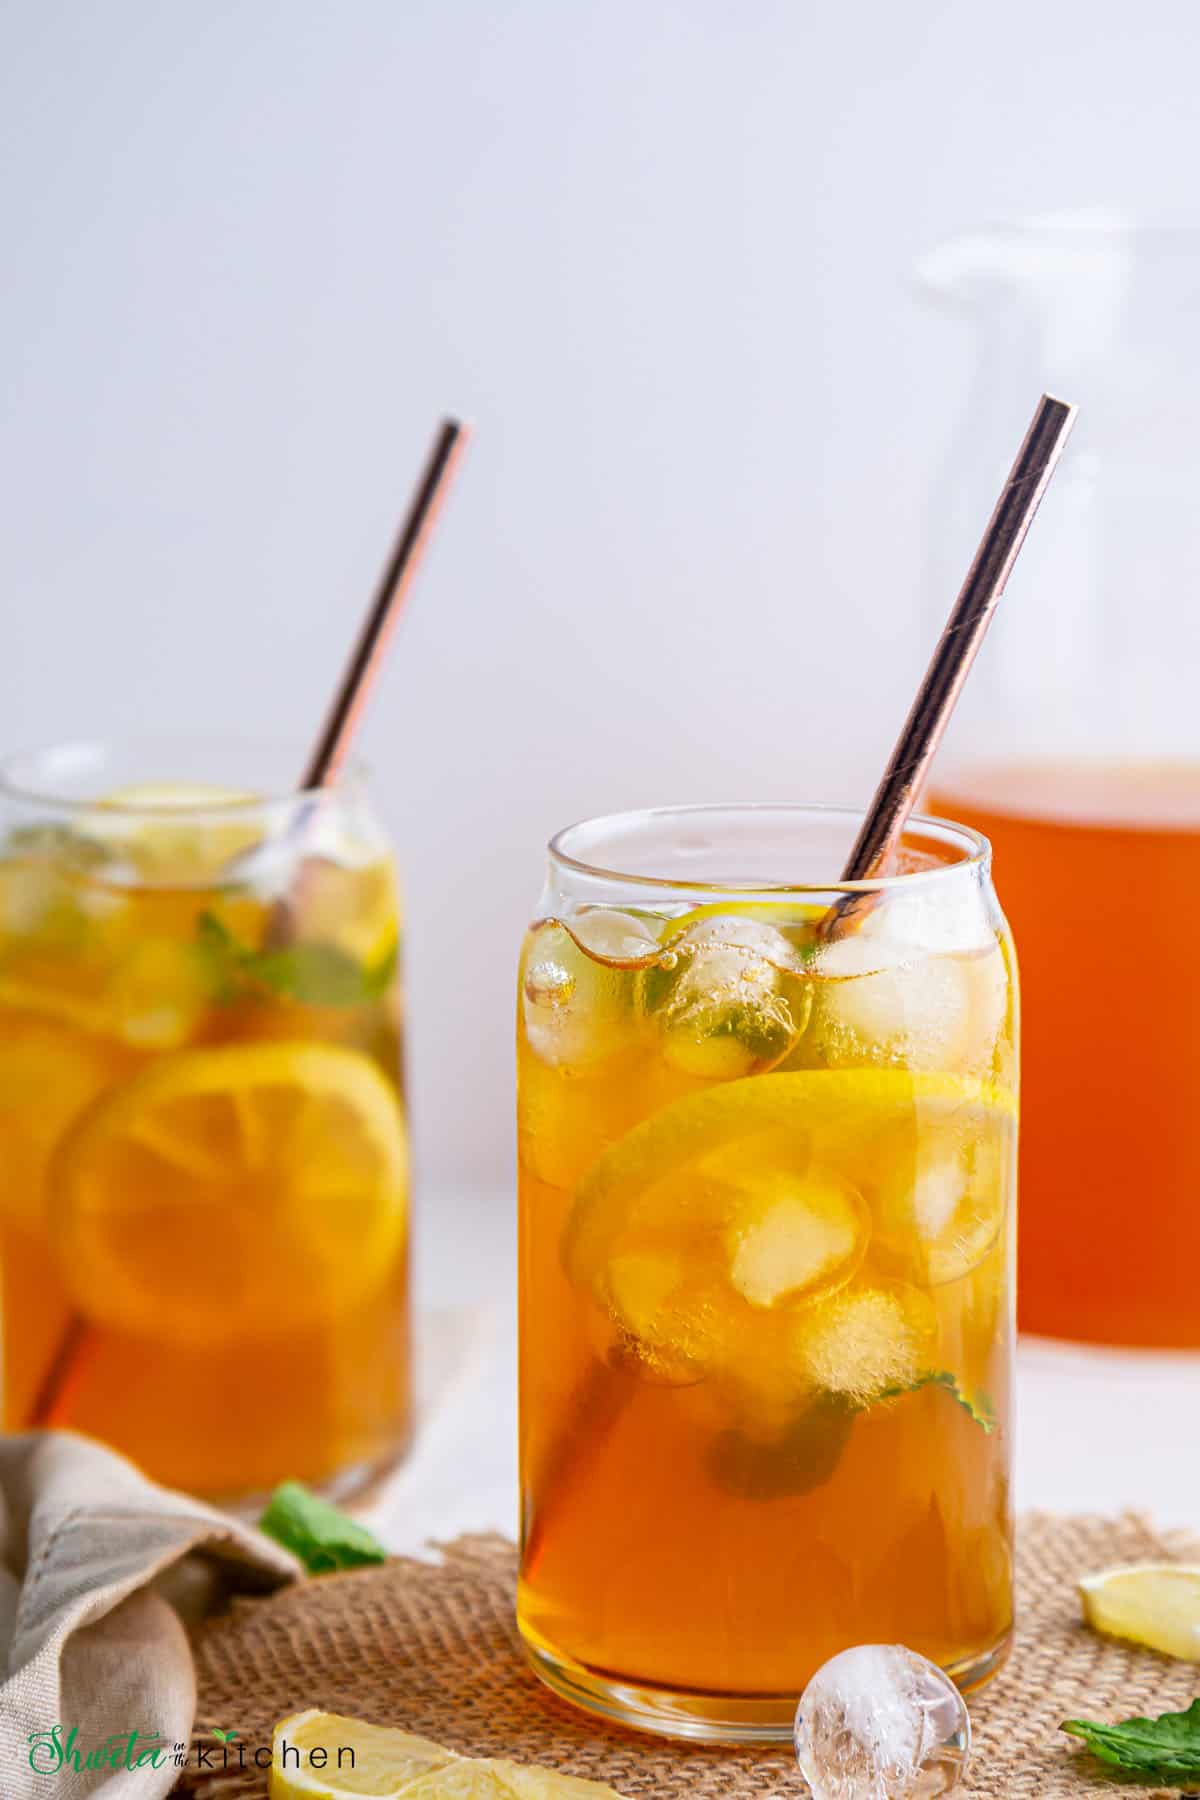 Two glasses of lemon iced tea with ice cubes, lemon slices, and straws